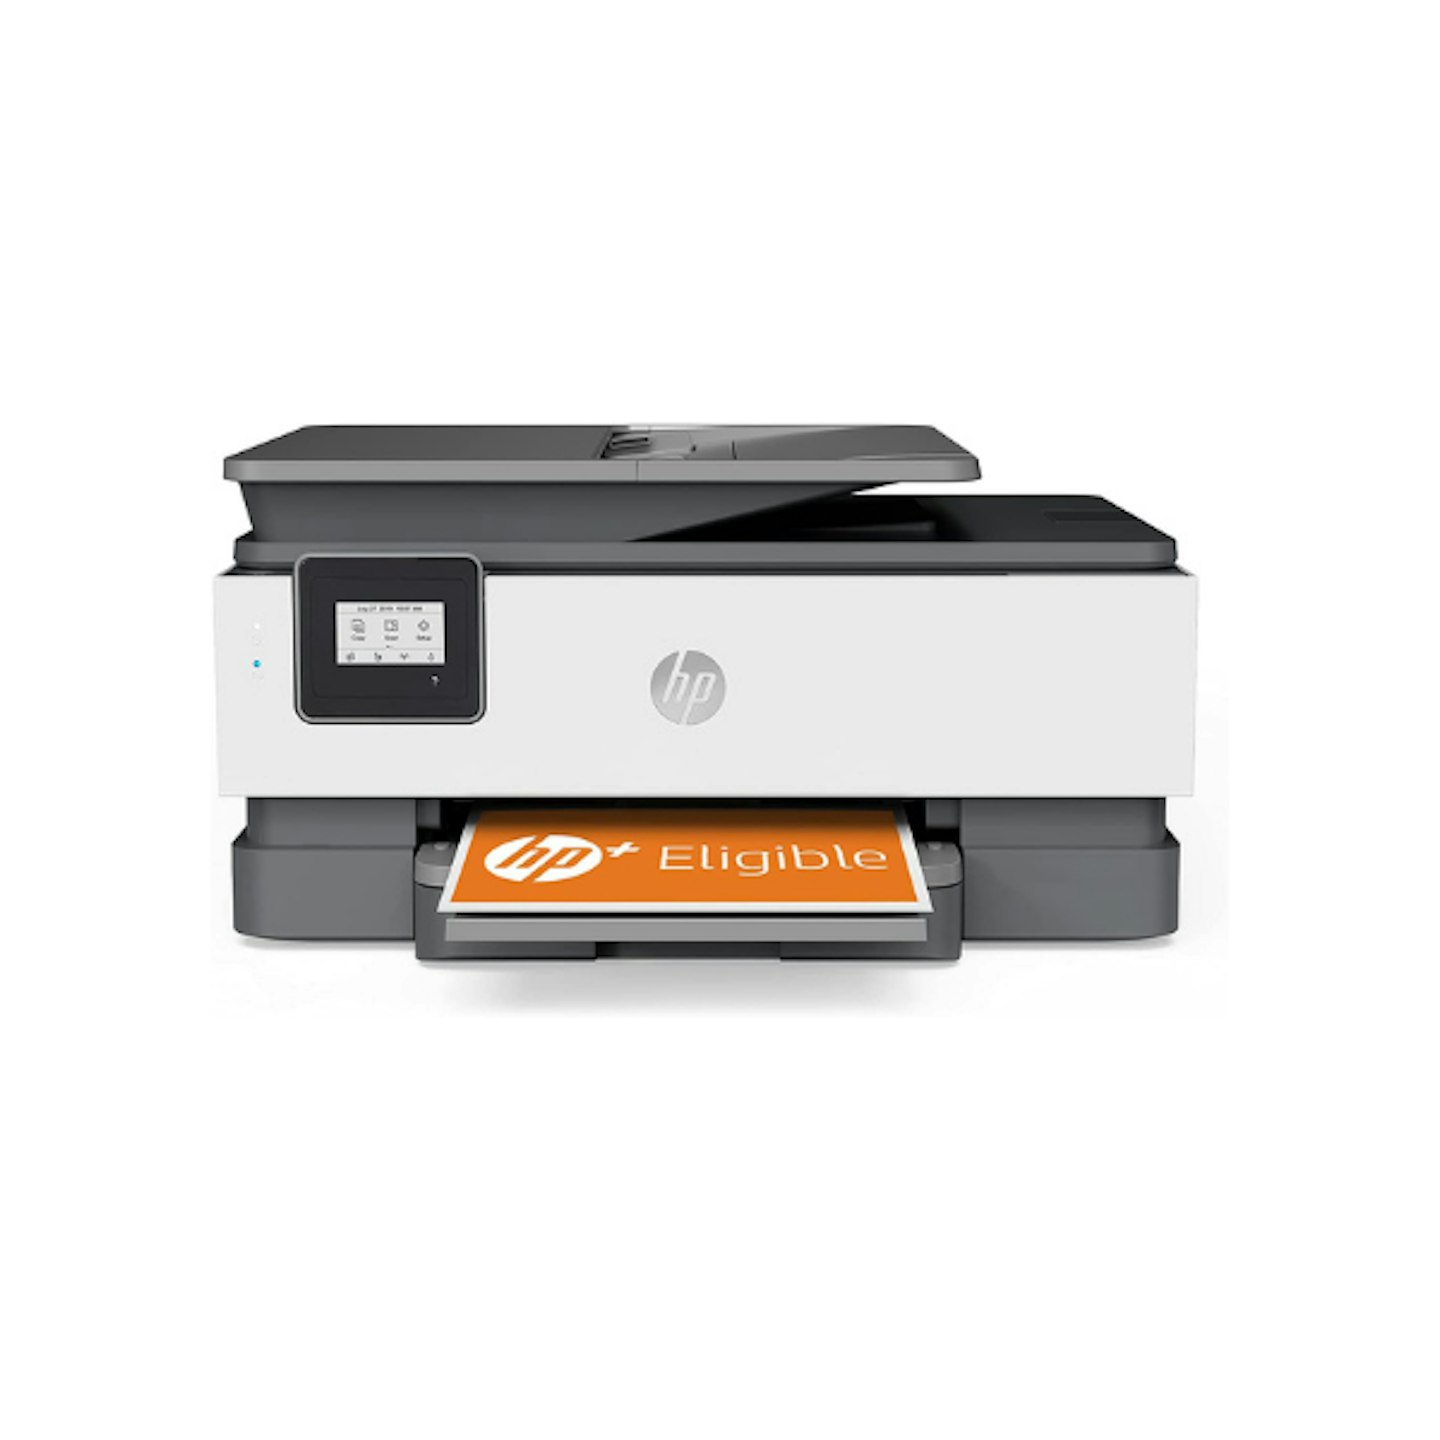 A HP OfficeJet 8014e All in One Colour Printer